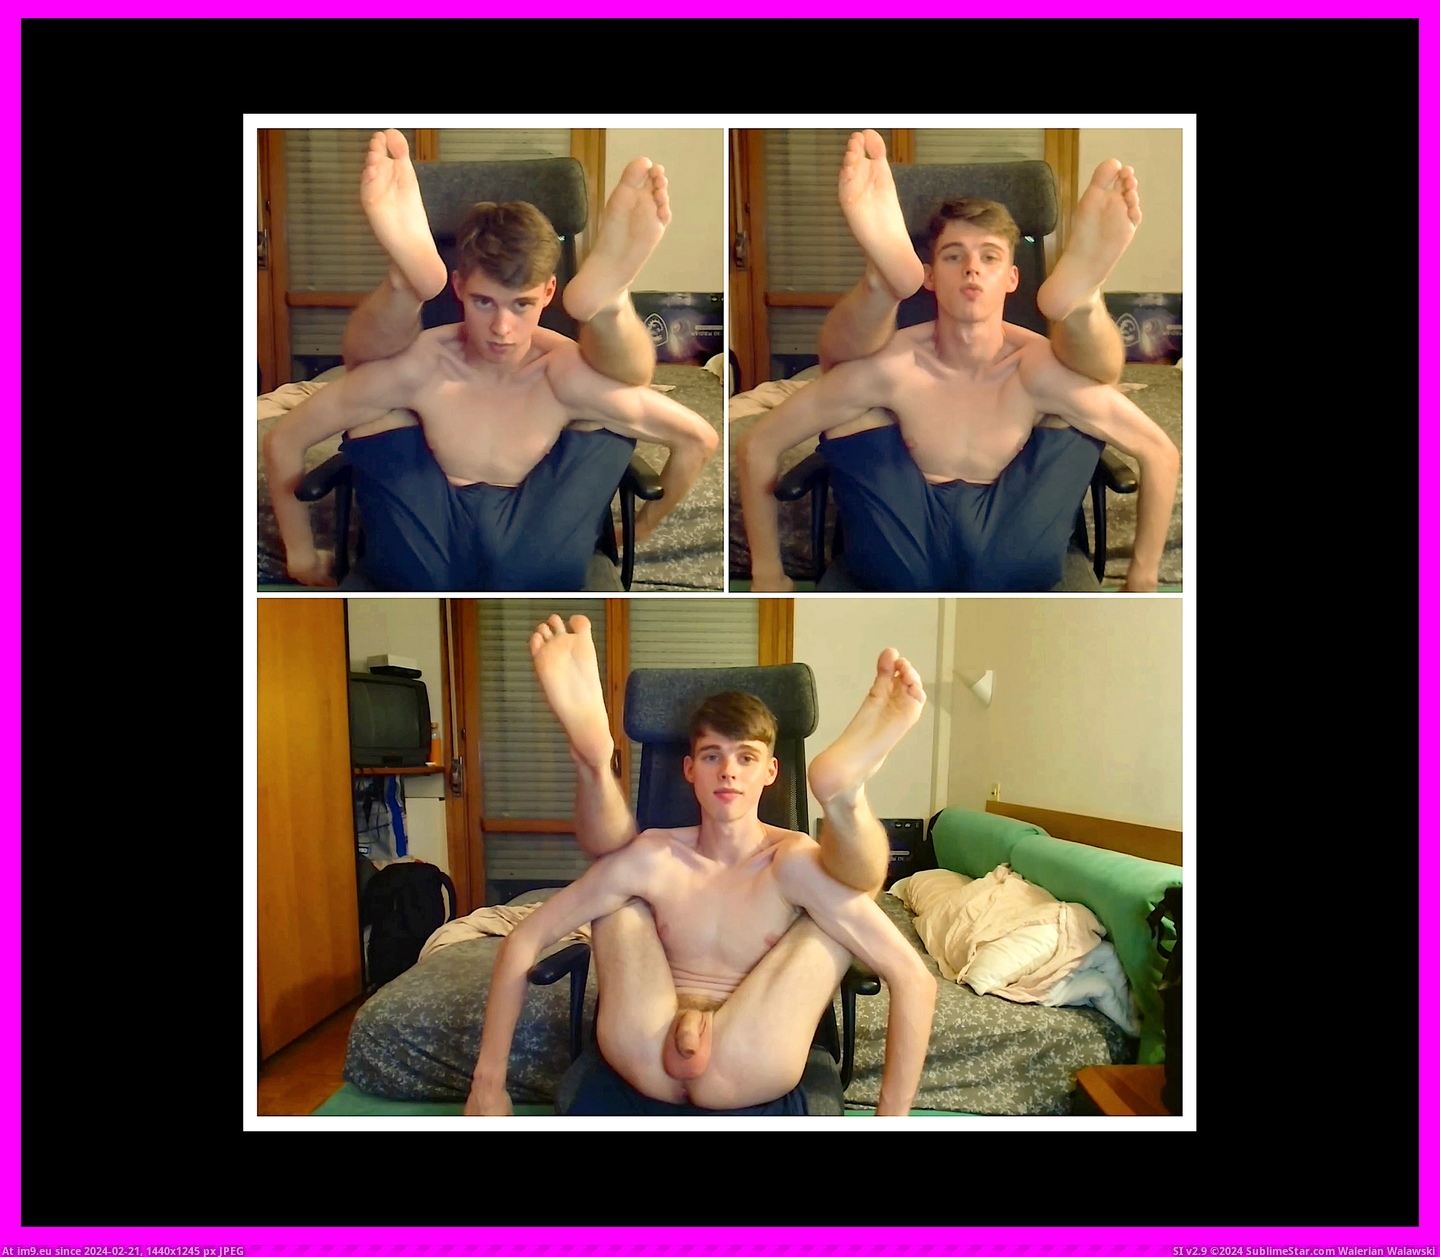 #Amateur #Teen #Nude #Cute #Boy #Unclothed #Flexible #Gay #Babe #Twink #Clothed Clothed Unclothedd Aamteur Flexible Babe Pic. (Obraz z album Instant Upload))